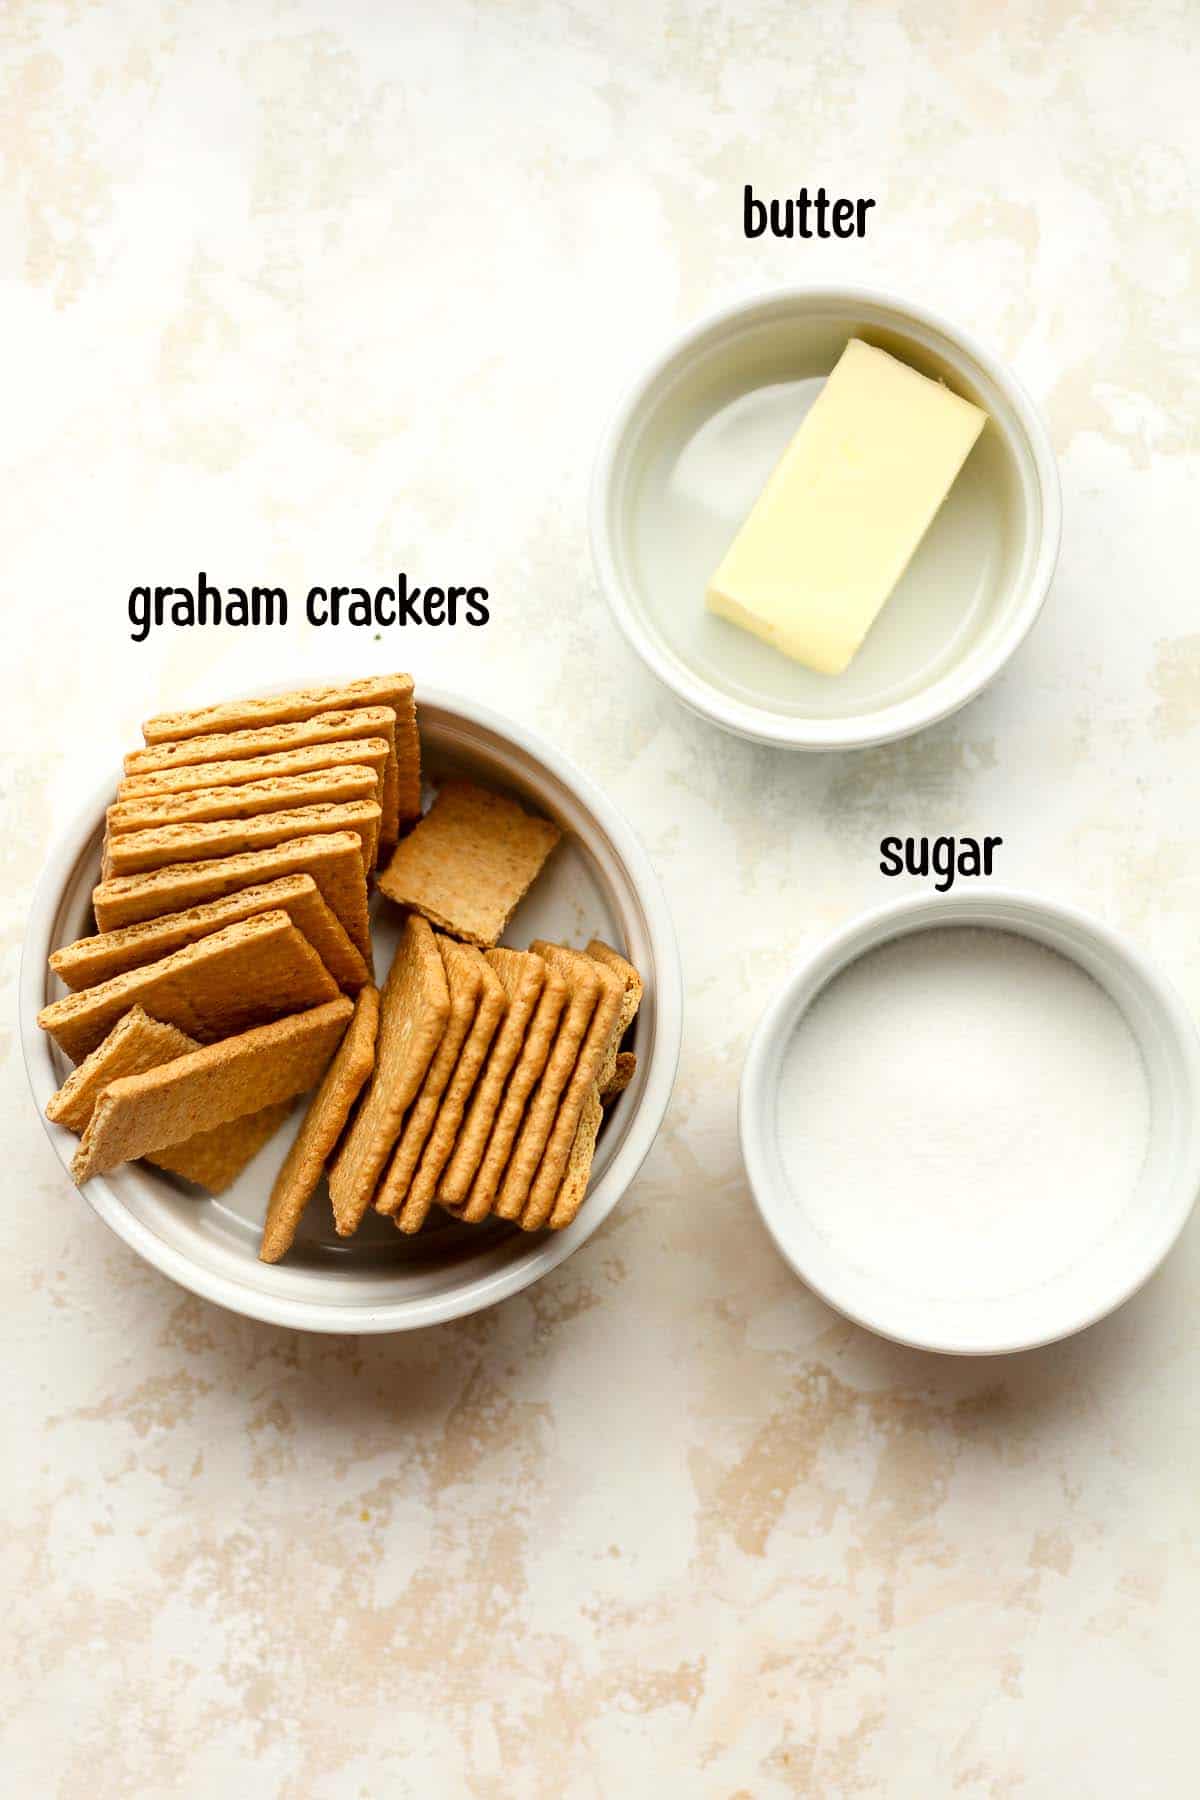 The labeled ingredients for the graham cracker crust.